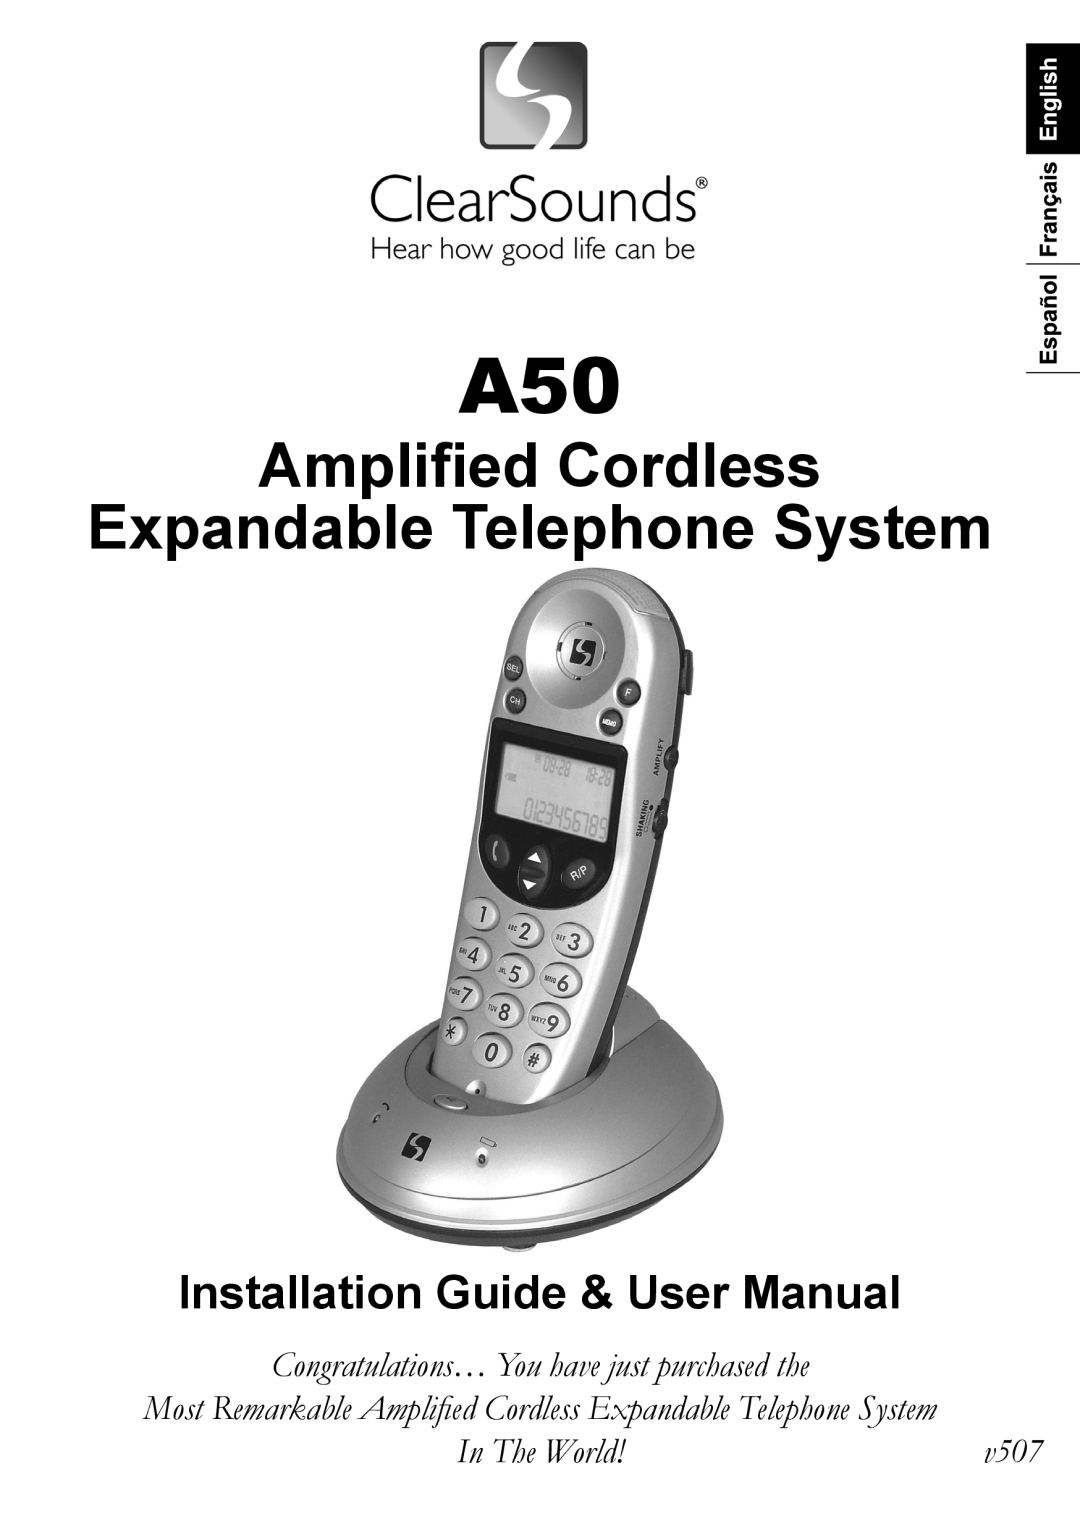 ClearSounds A50 user manual Installation Guide & User Manual, Amplified Cordless Expandable Telephone System, v507 